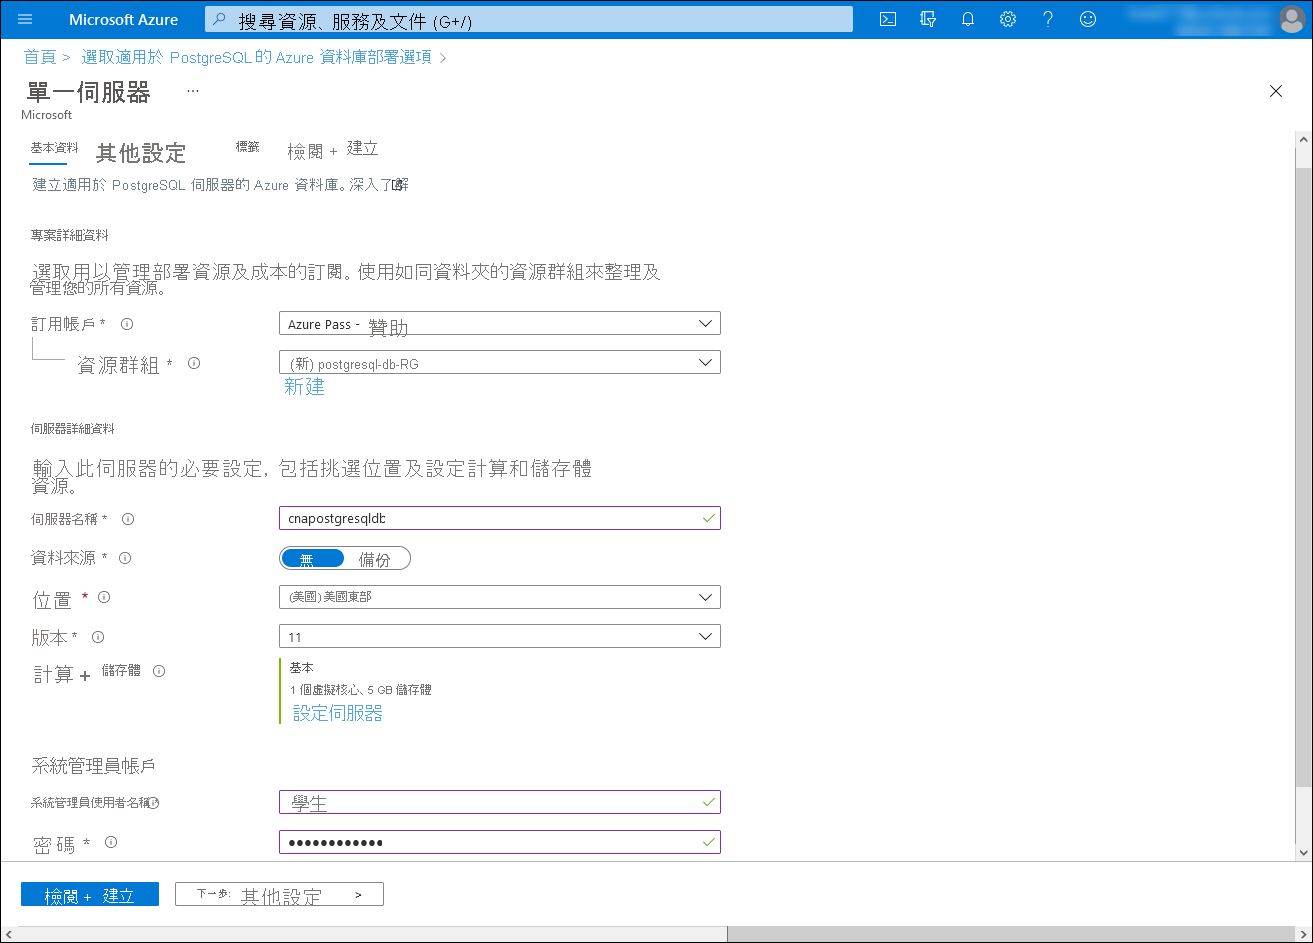 Screenshot of the Basics tab of the Single server blade in the Azure portal.